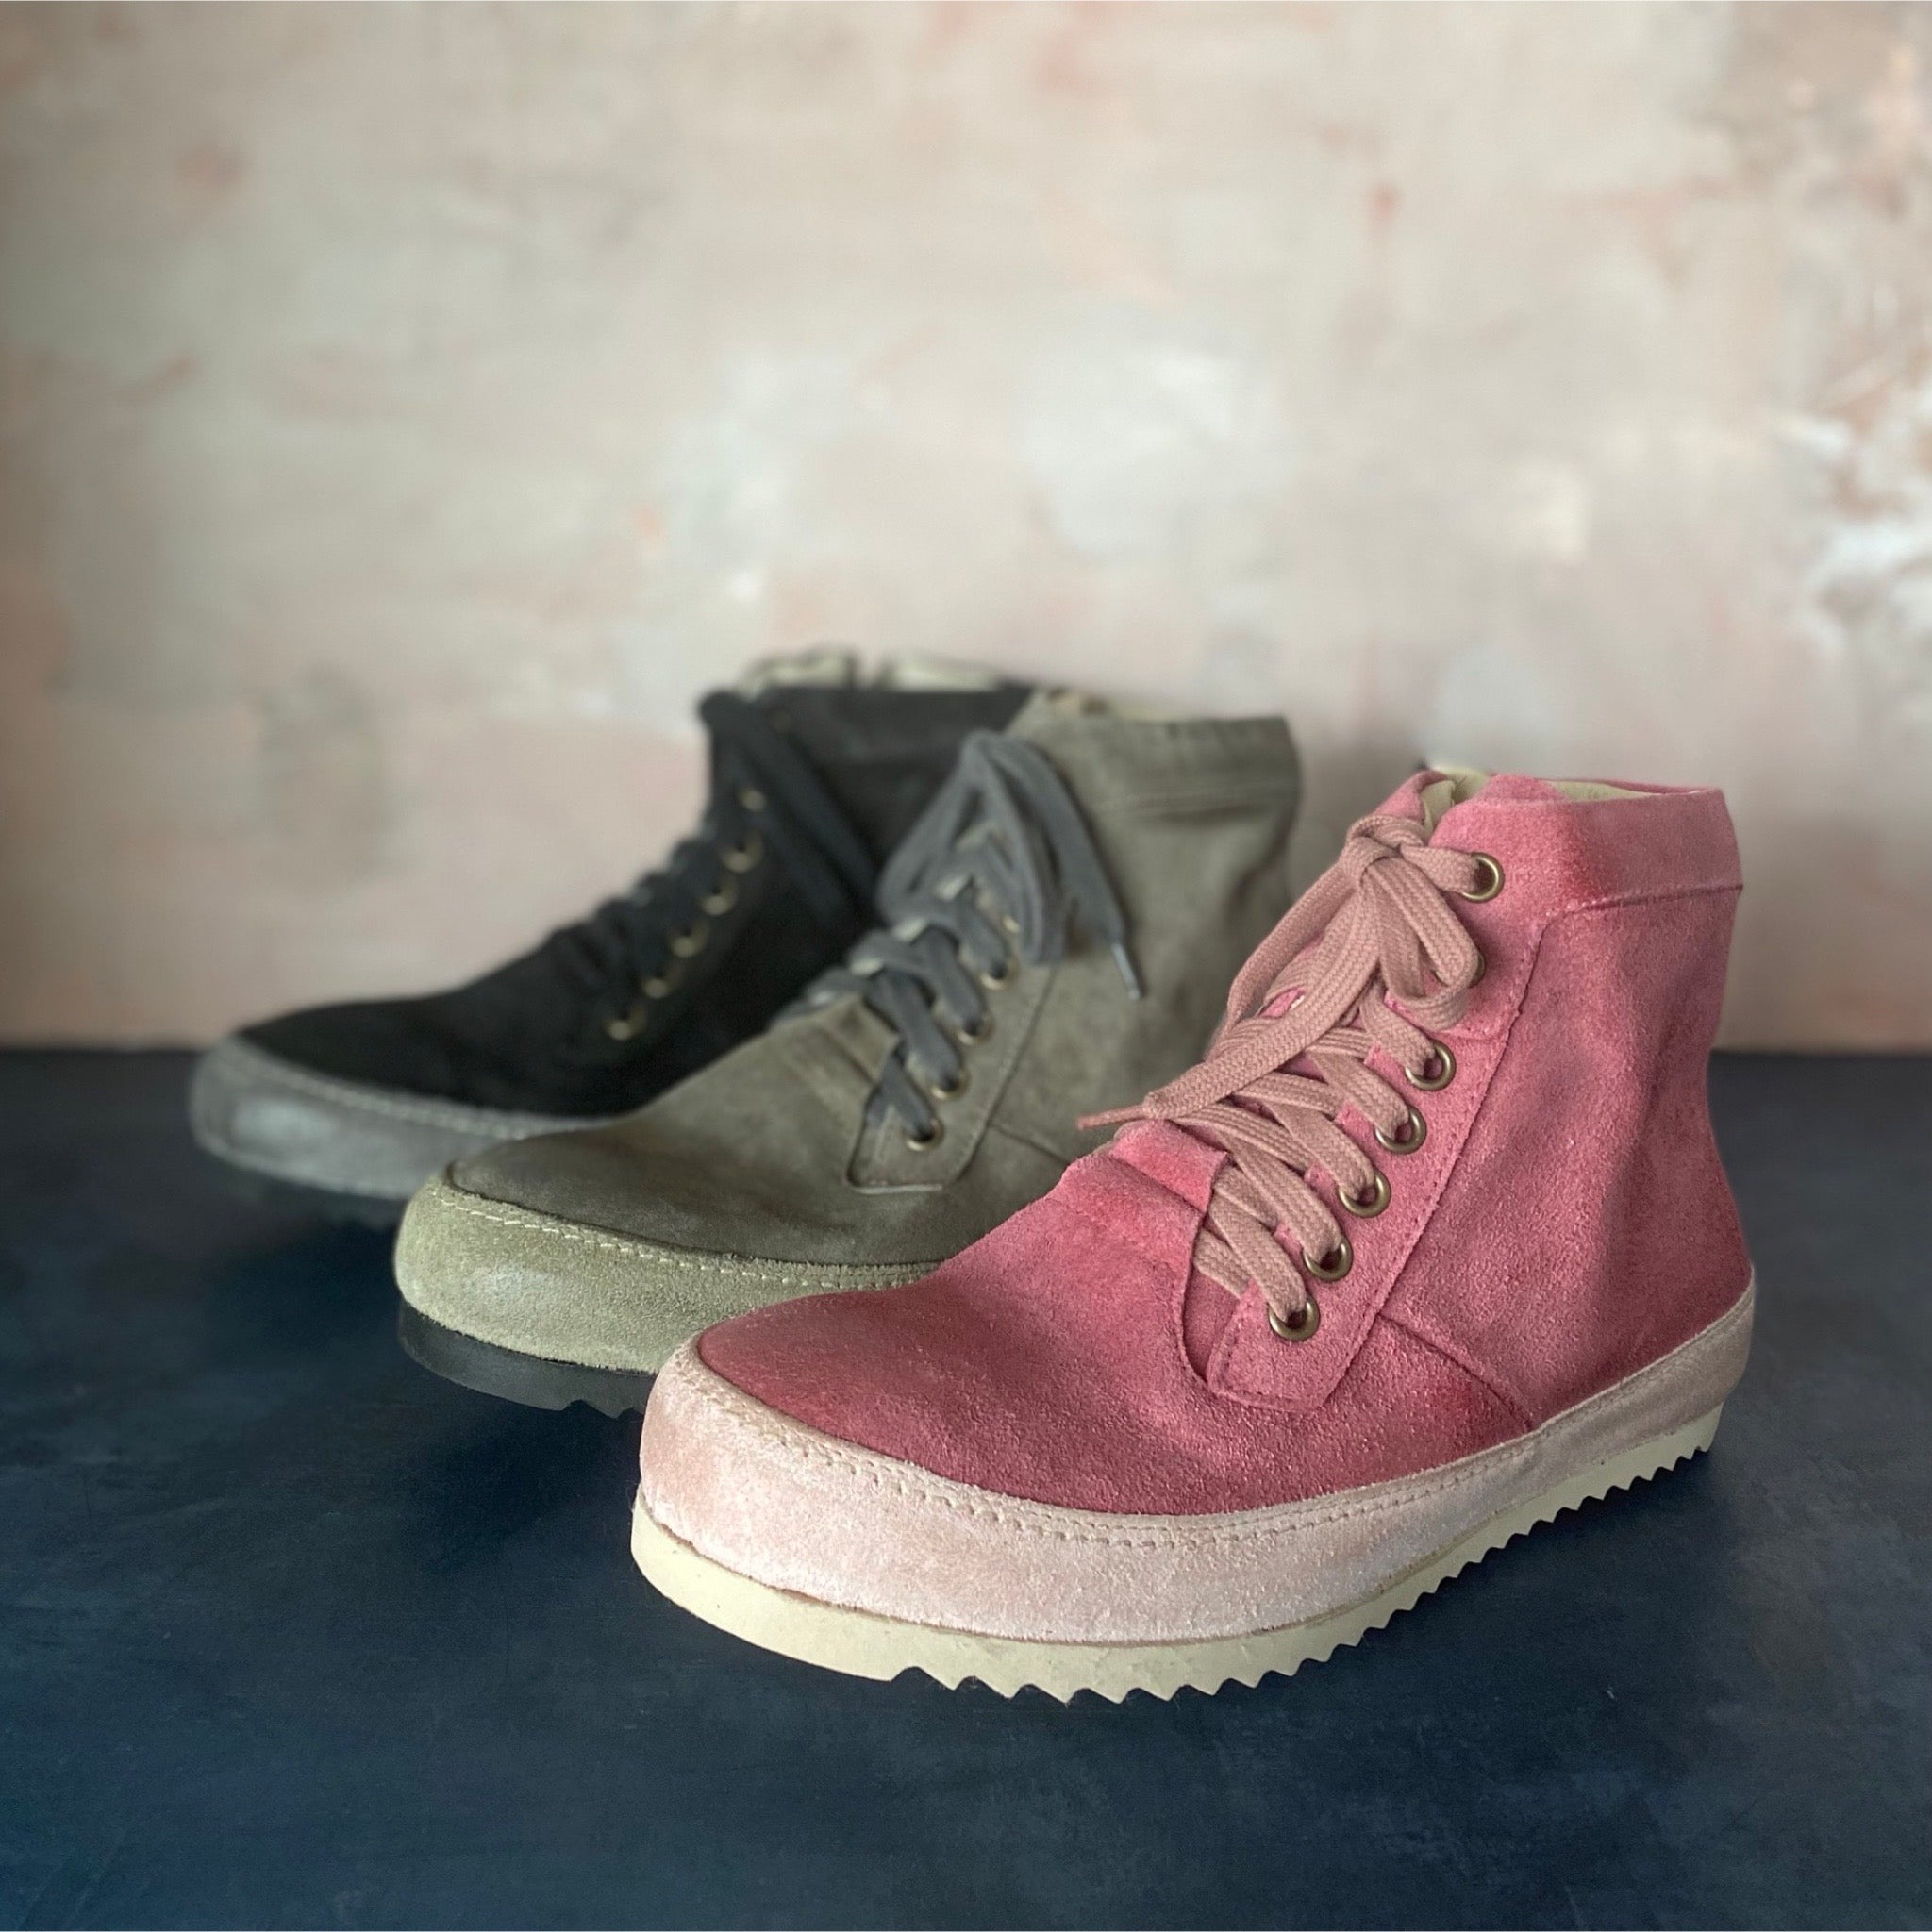 Victoria Varrasso Sportiva Two Tone Washed Pink Suede Hightops